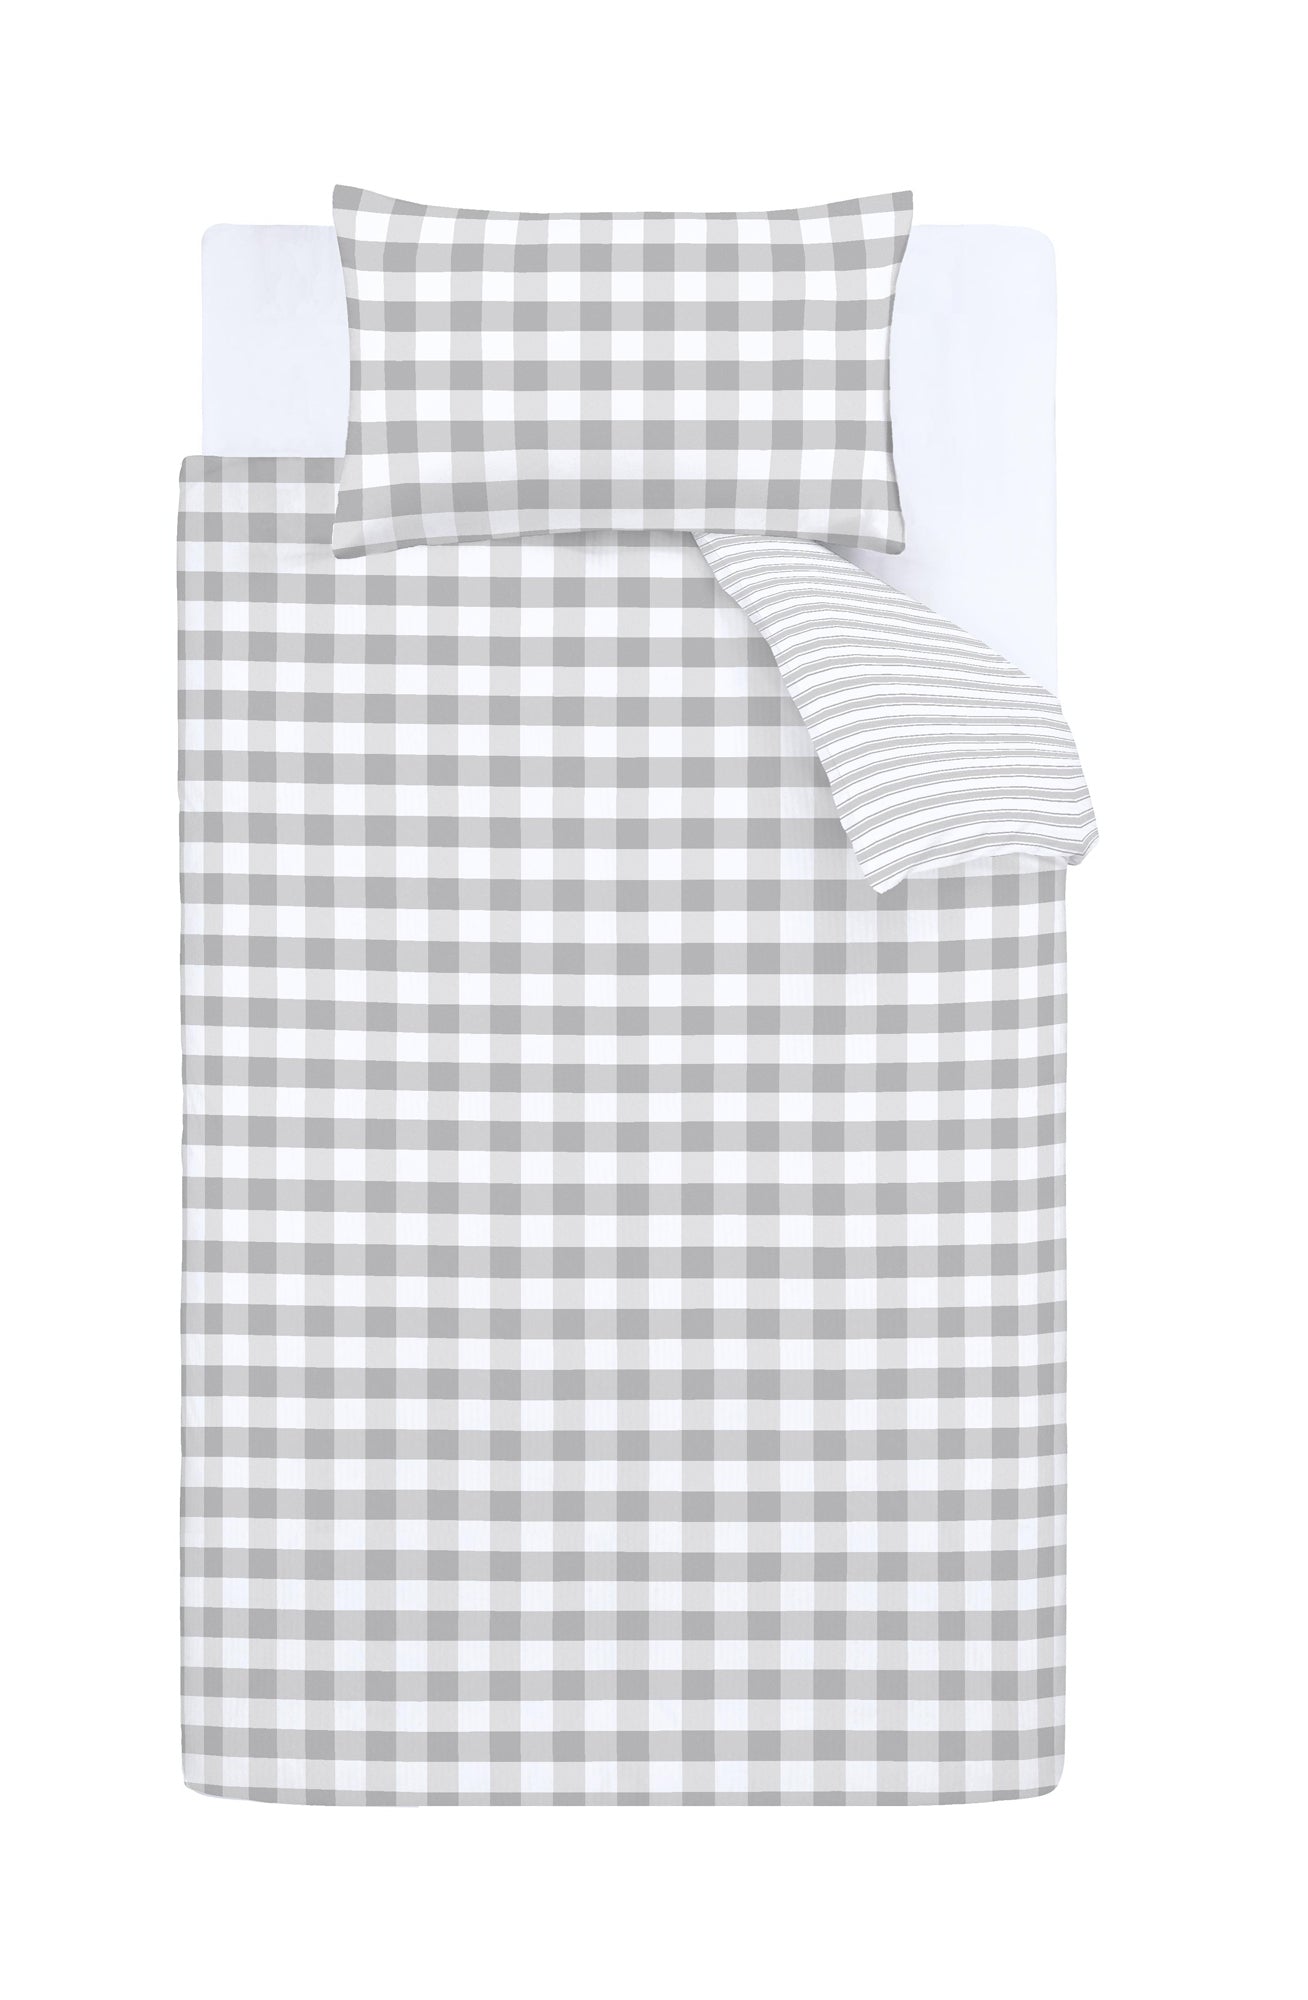 Bianca Grey Check And Stripe 100% Cotton Standard (25cm) Fitted Sheet